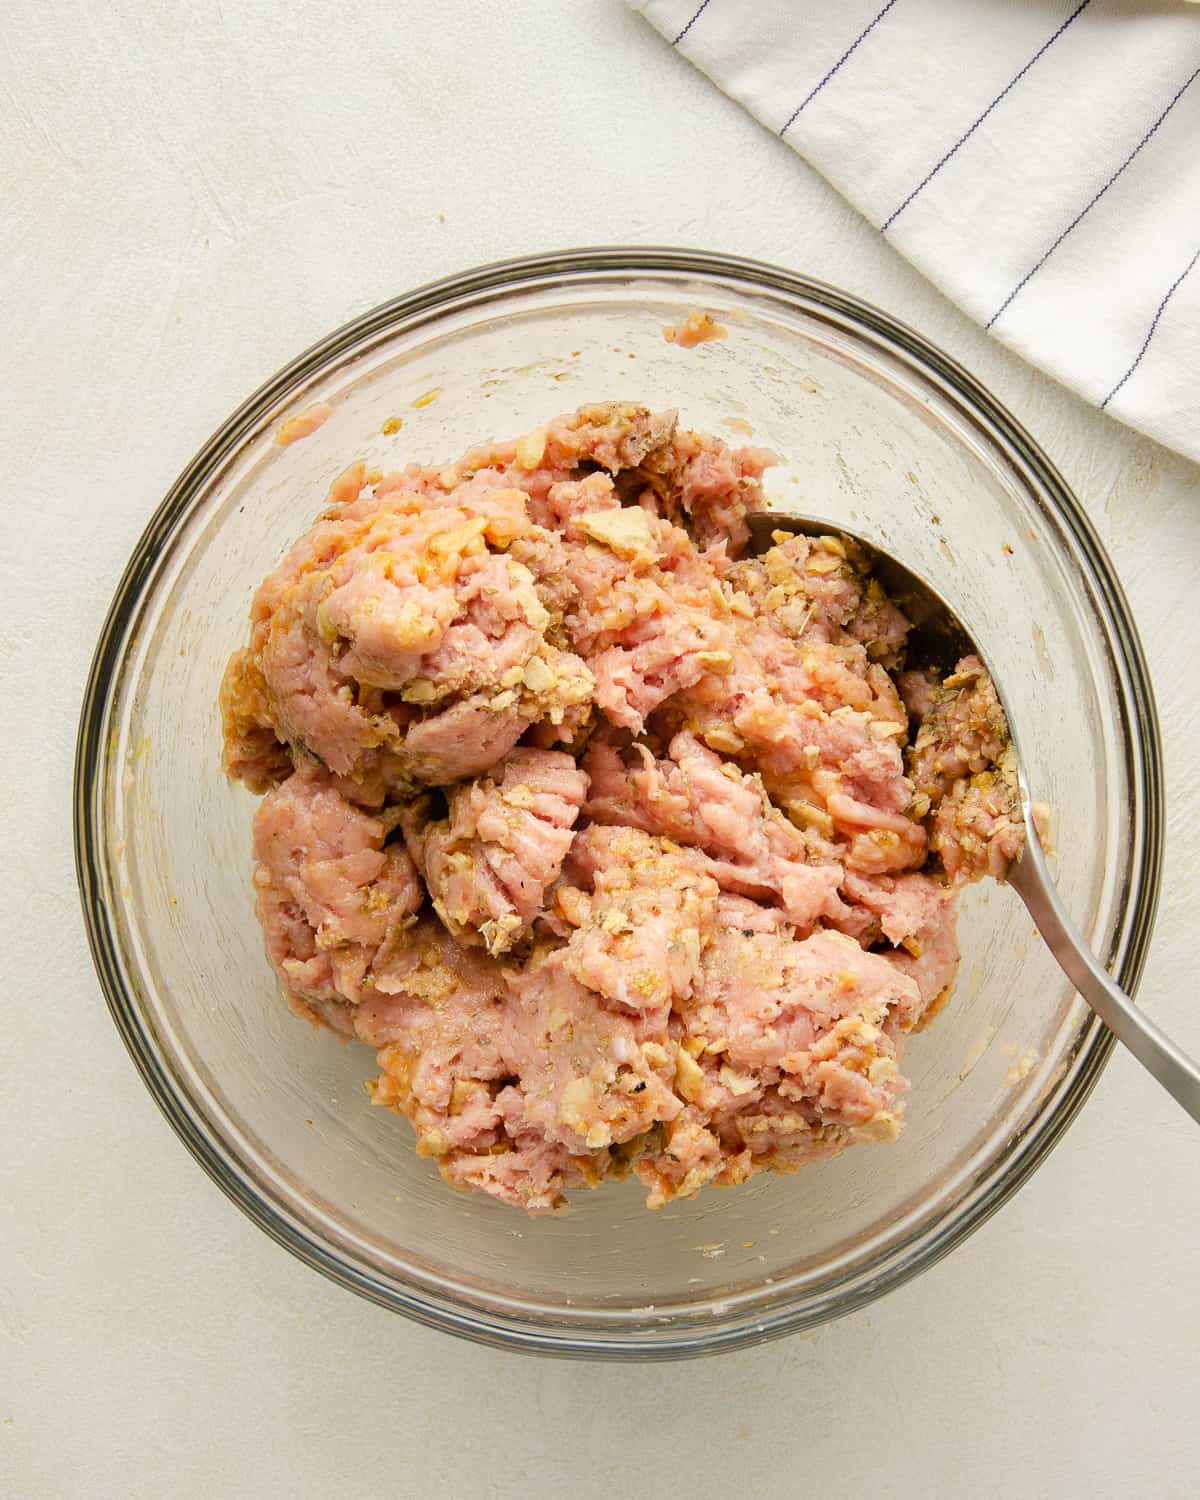 Ground turkey mixed with other ingredients for gluten free meatballs.